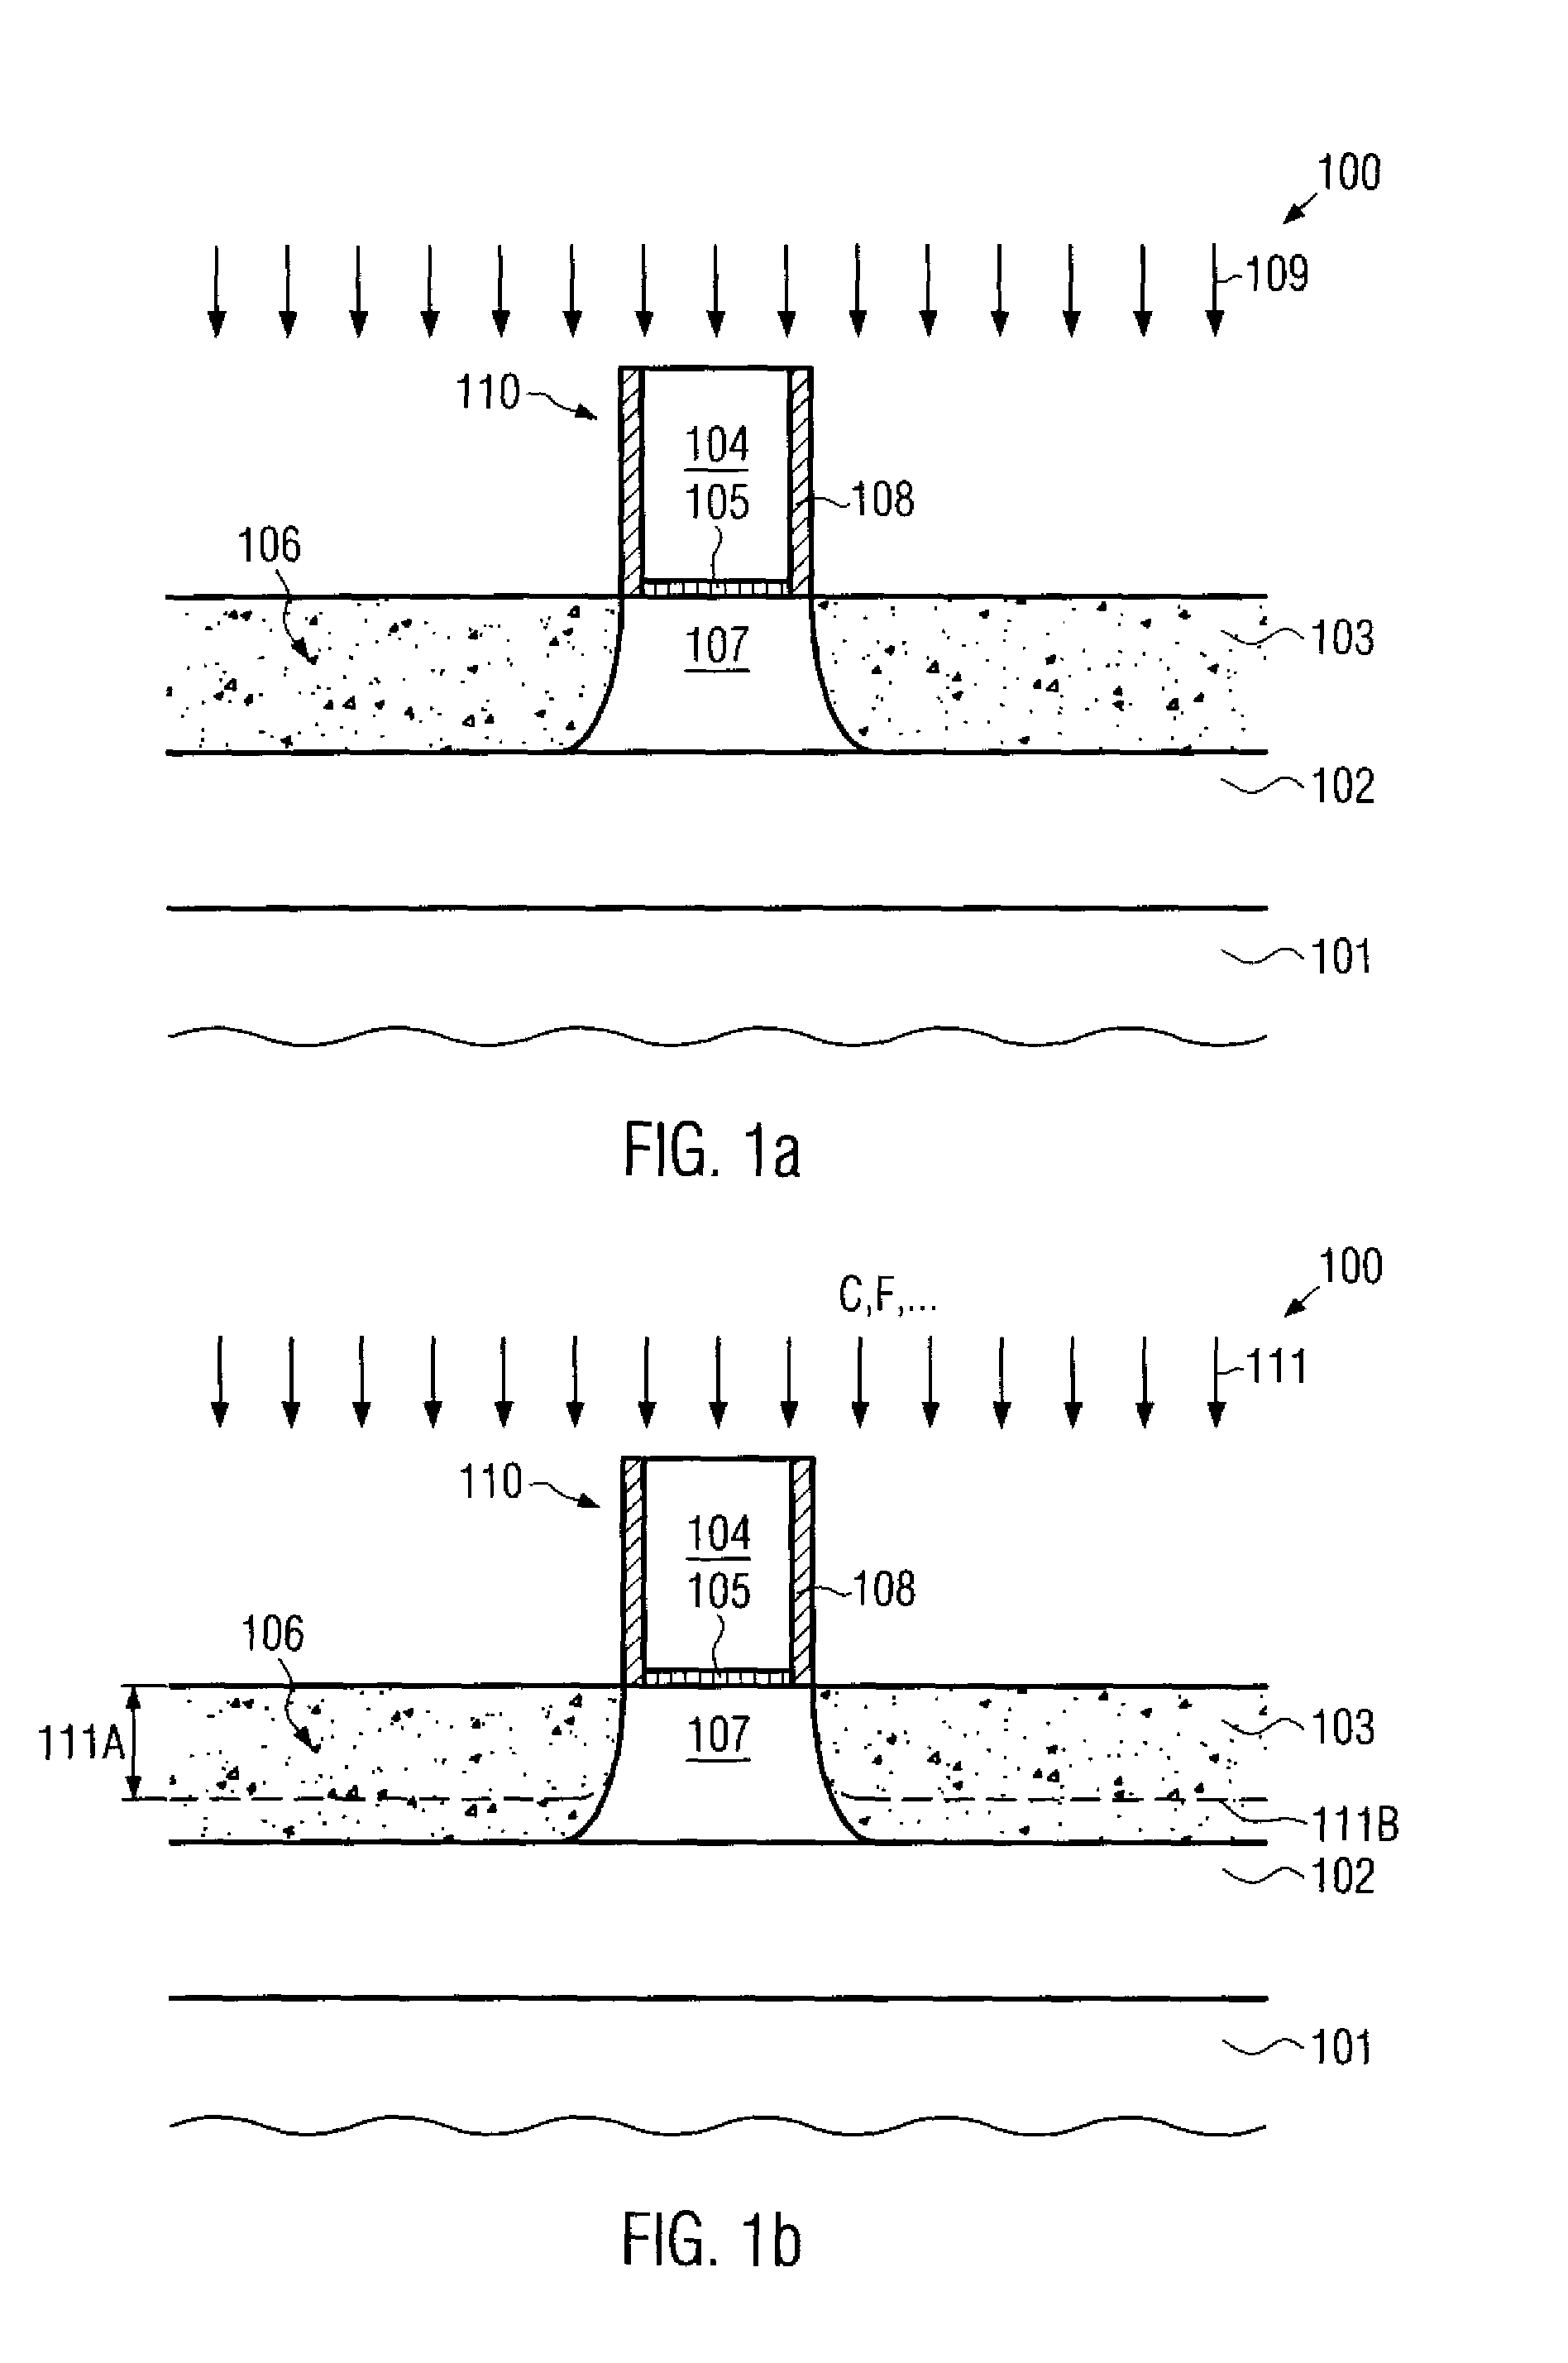 SOI transistor having a reduced body potential and a method of forming the same